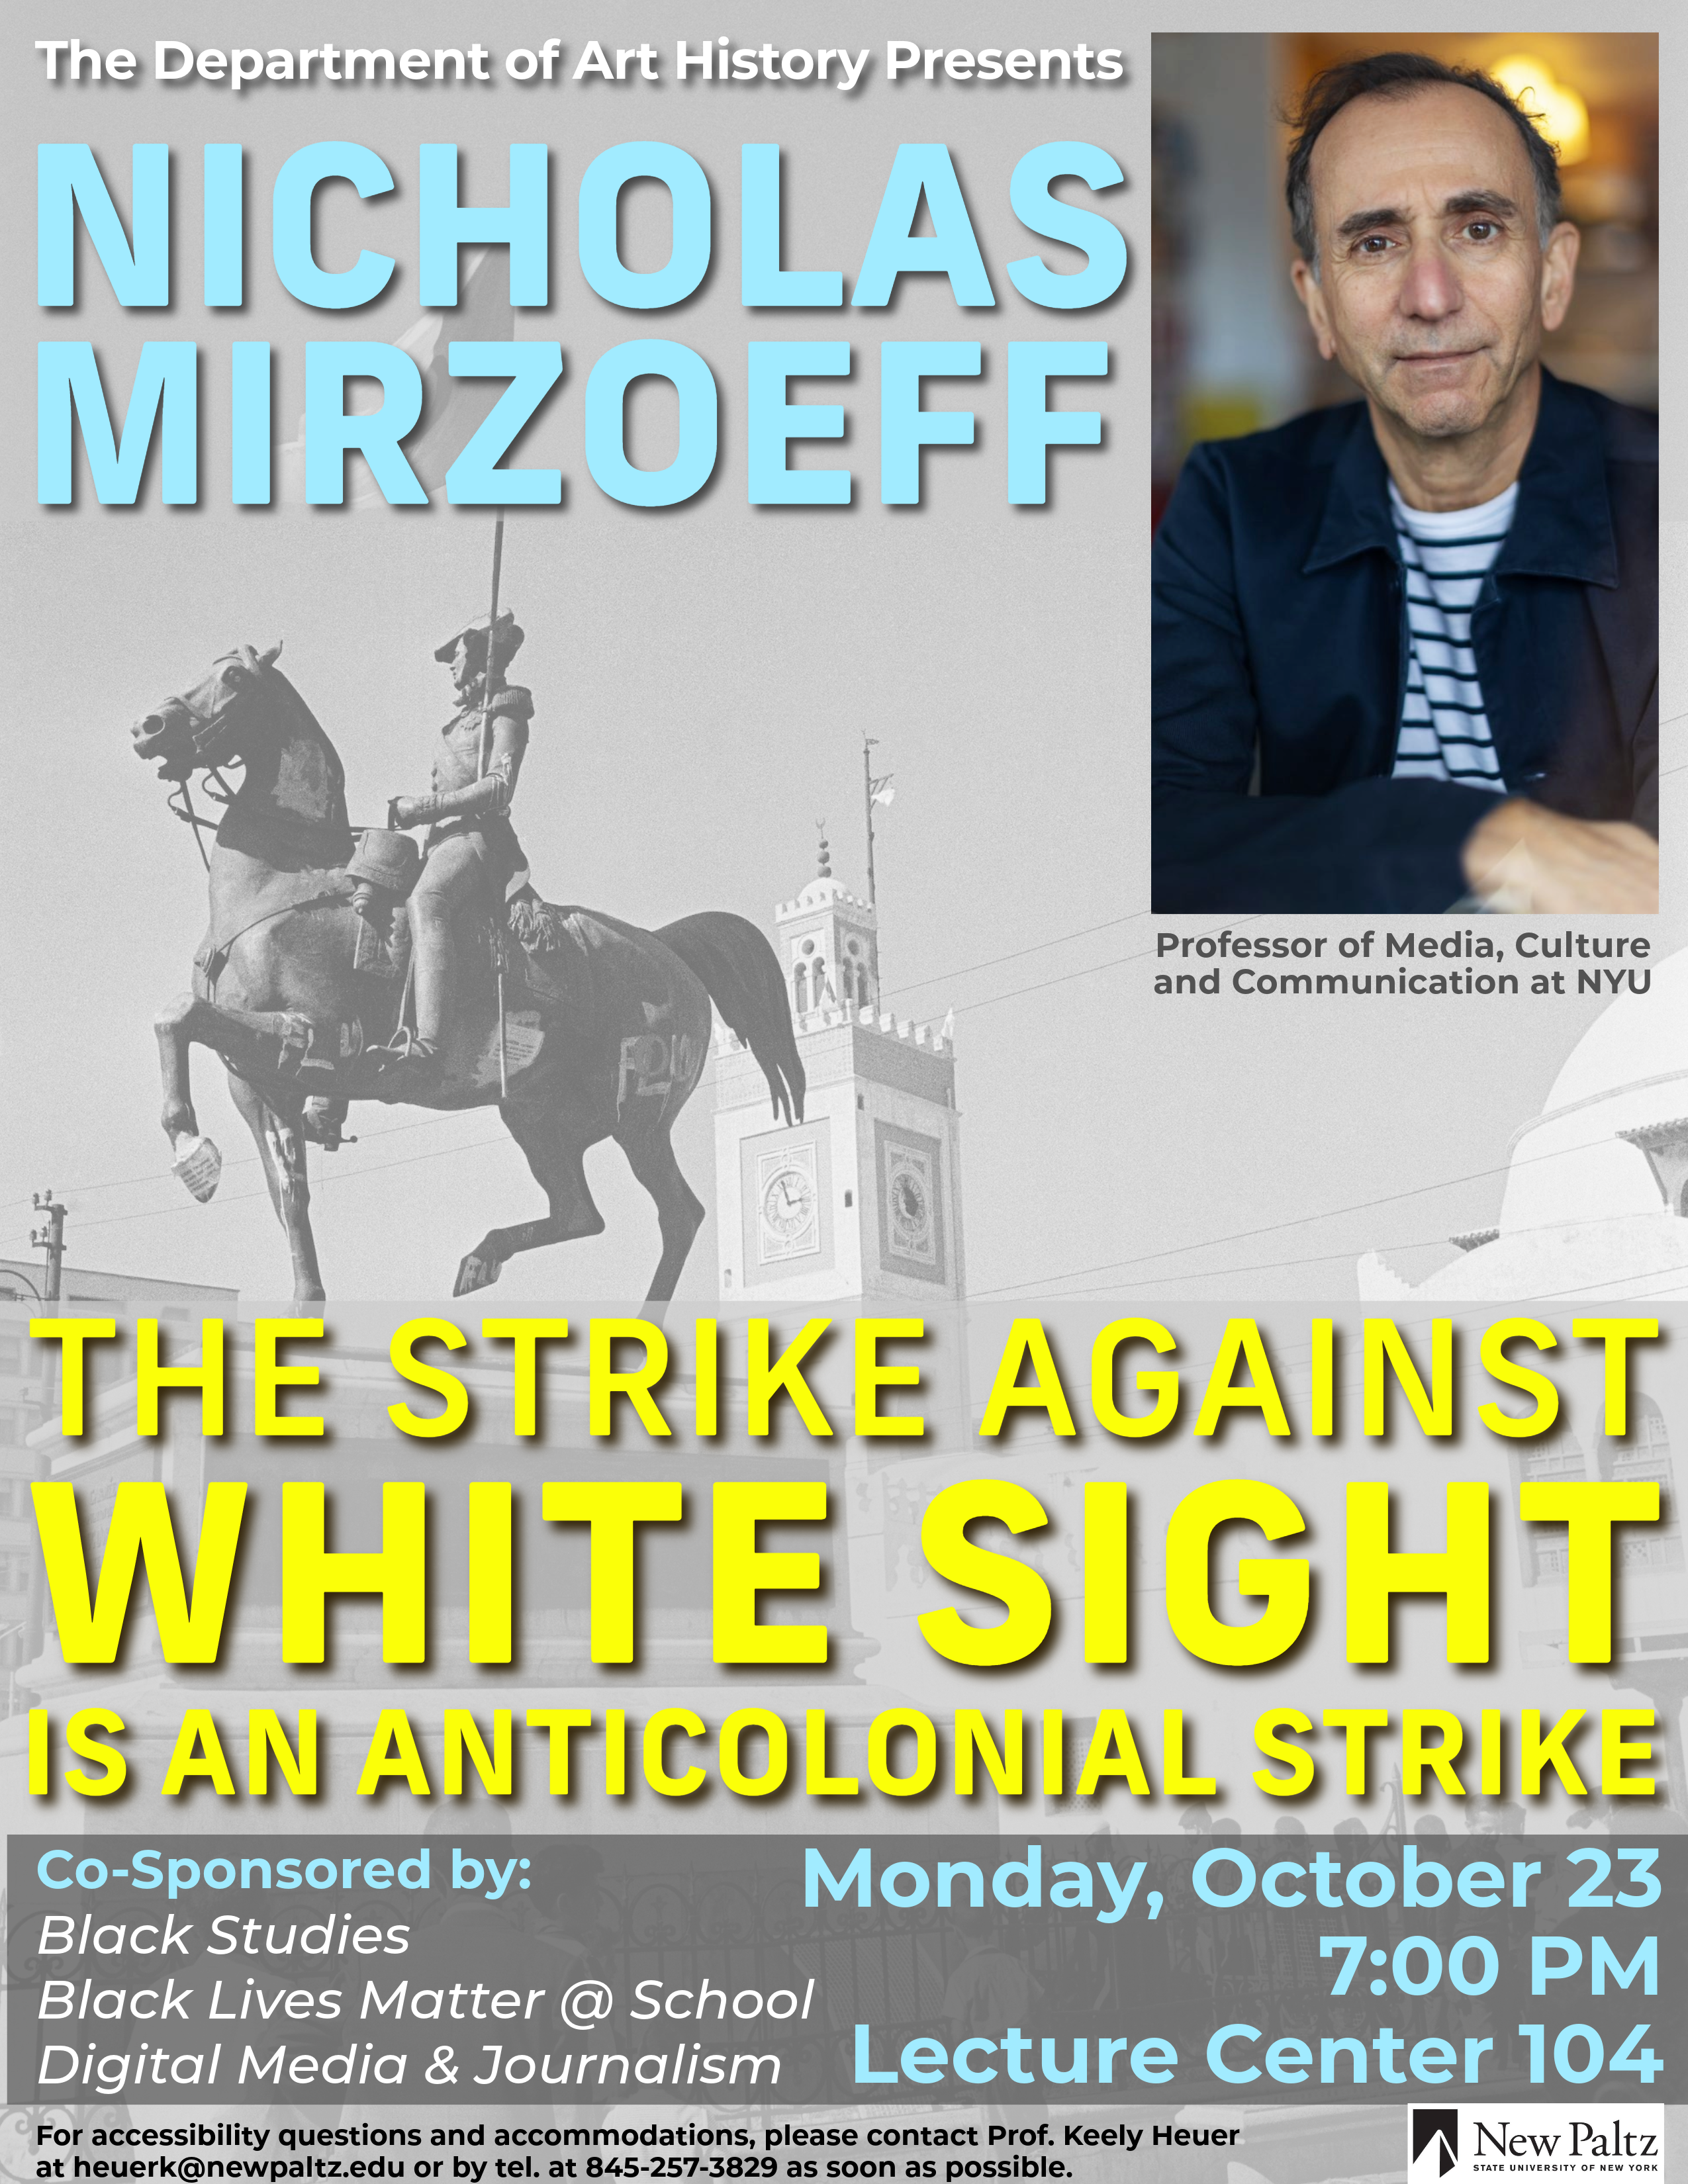 Flyer for The Strike Against White Sight is an Anticolonial Strike